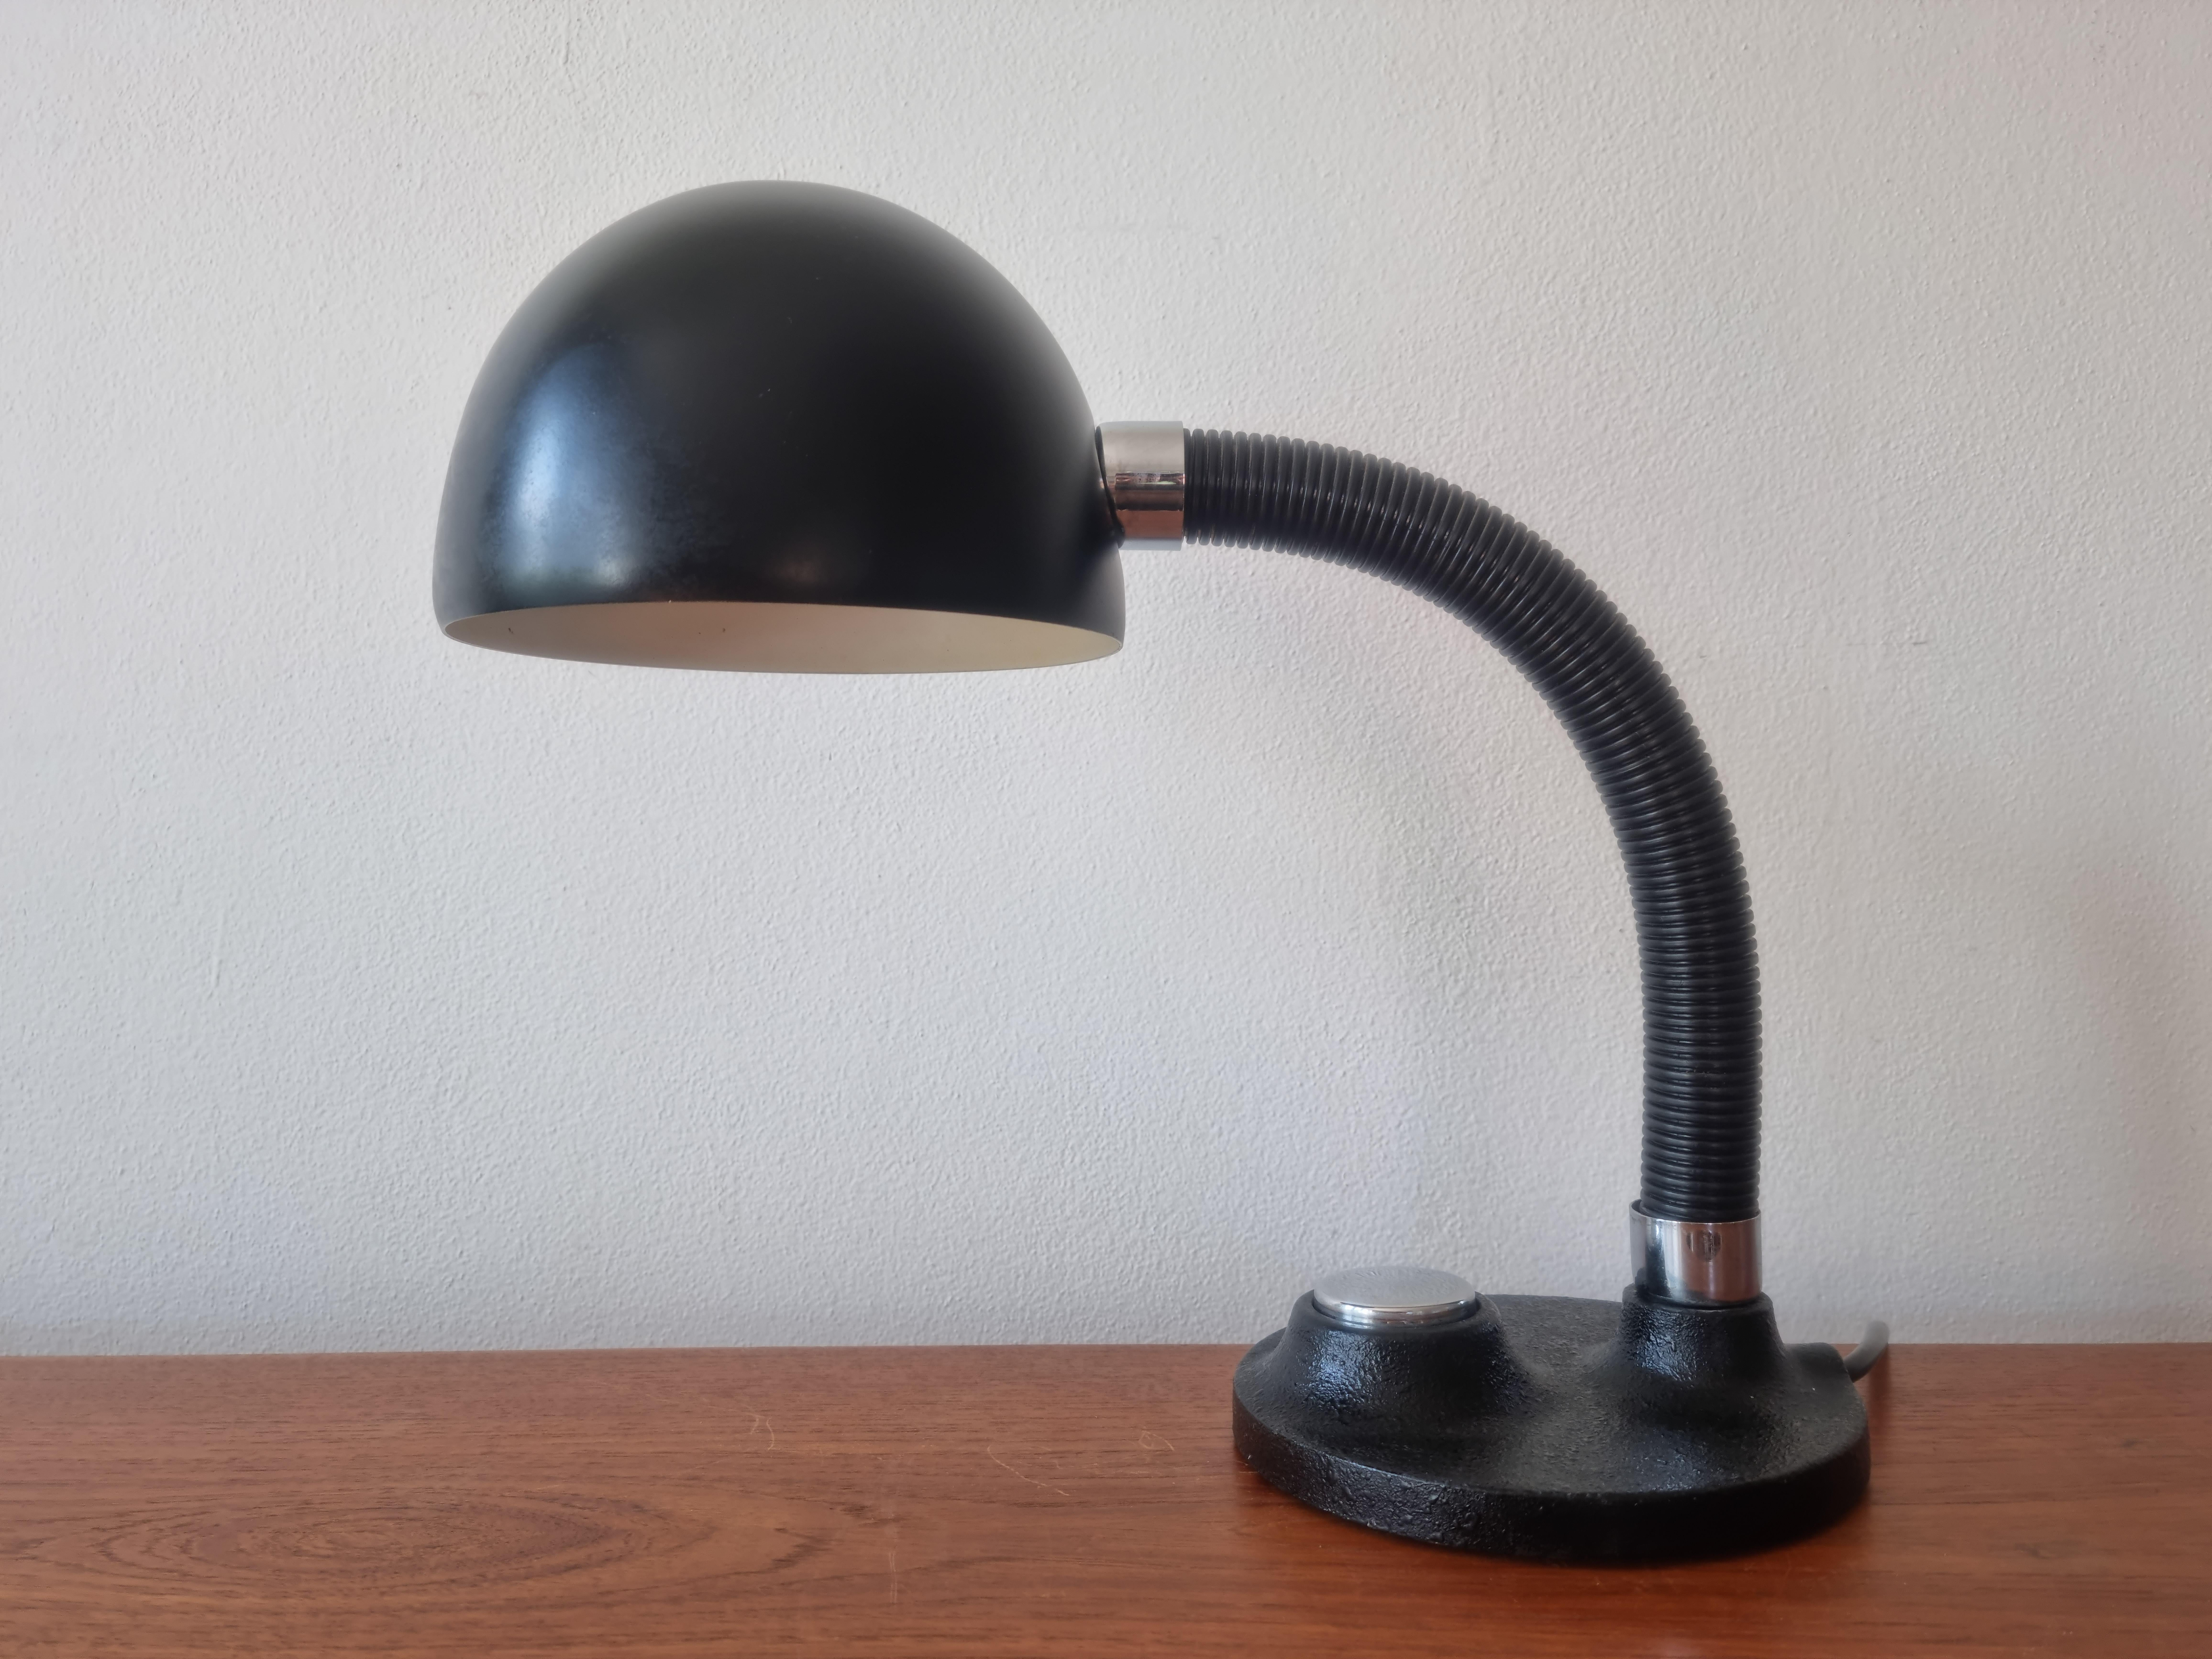 - nice style of lighting
- rare type
- adjustable
- bauhaus and industrial style.